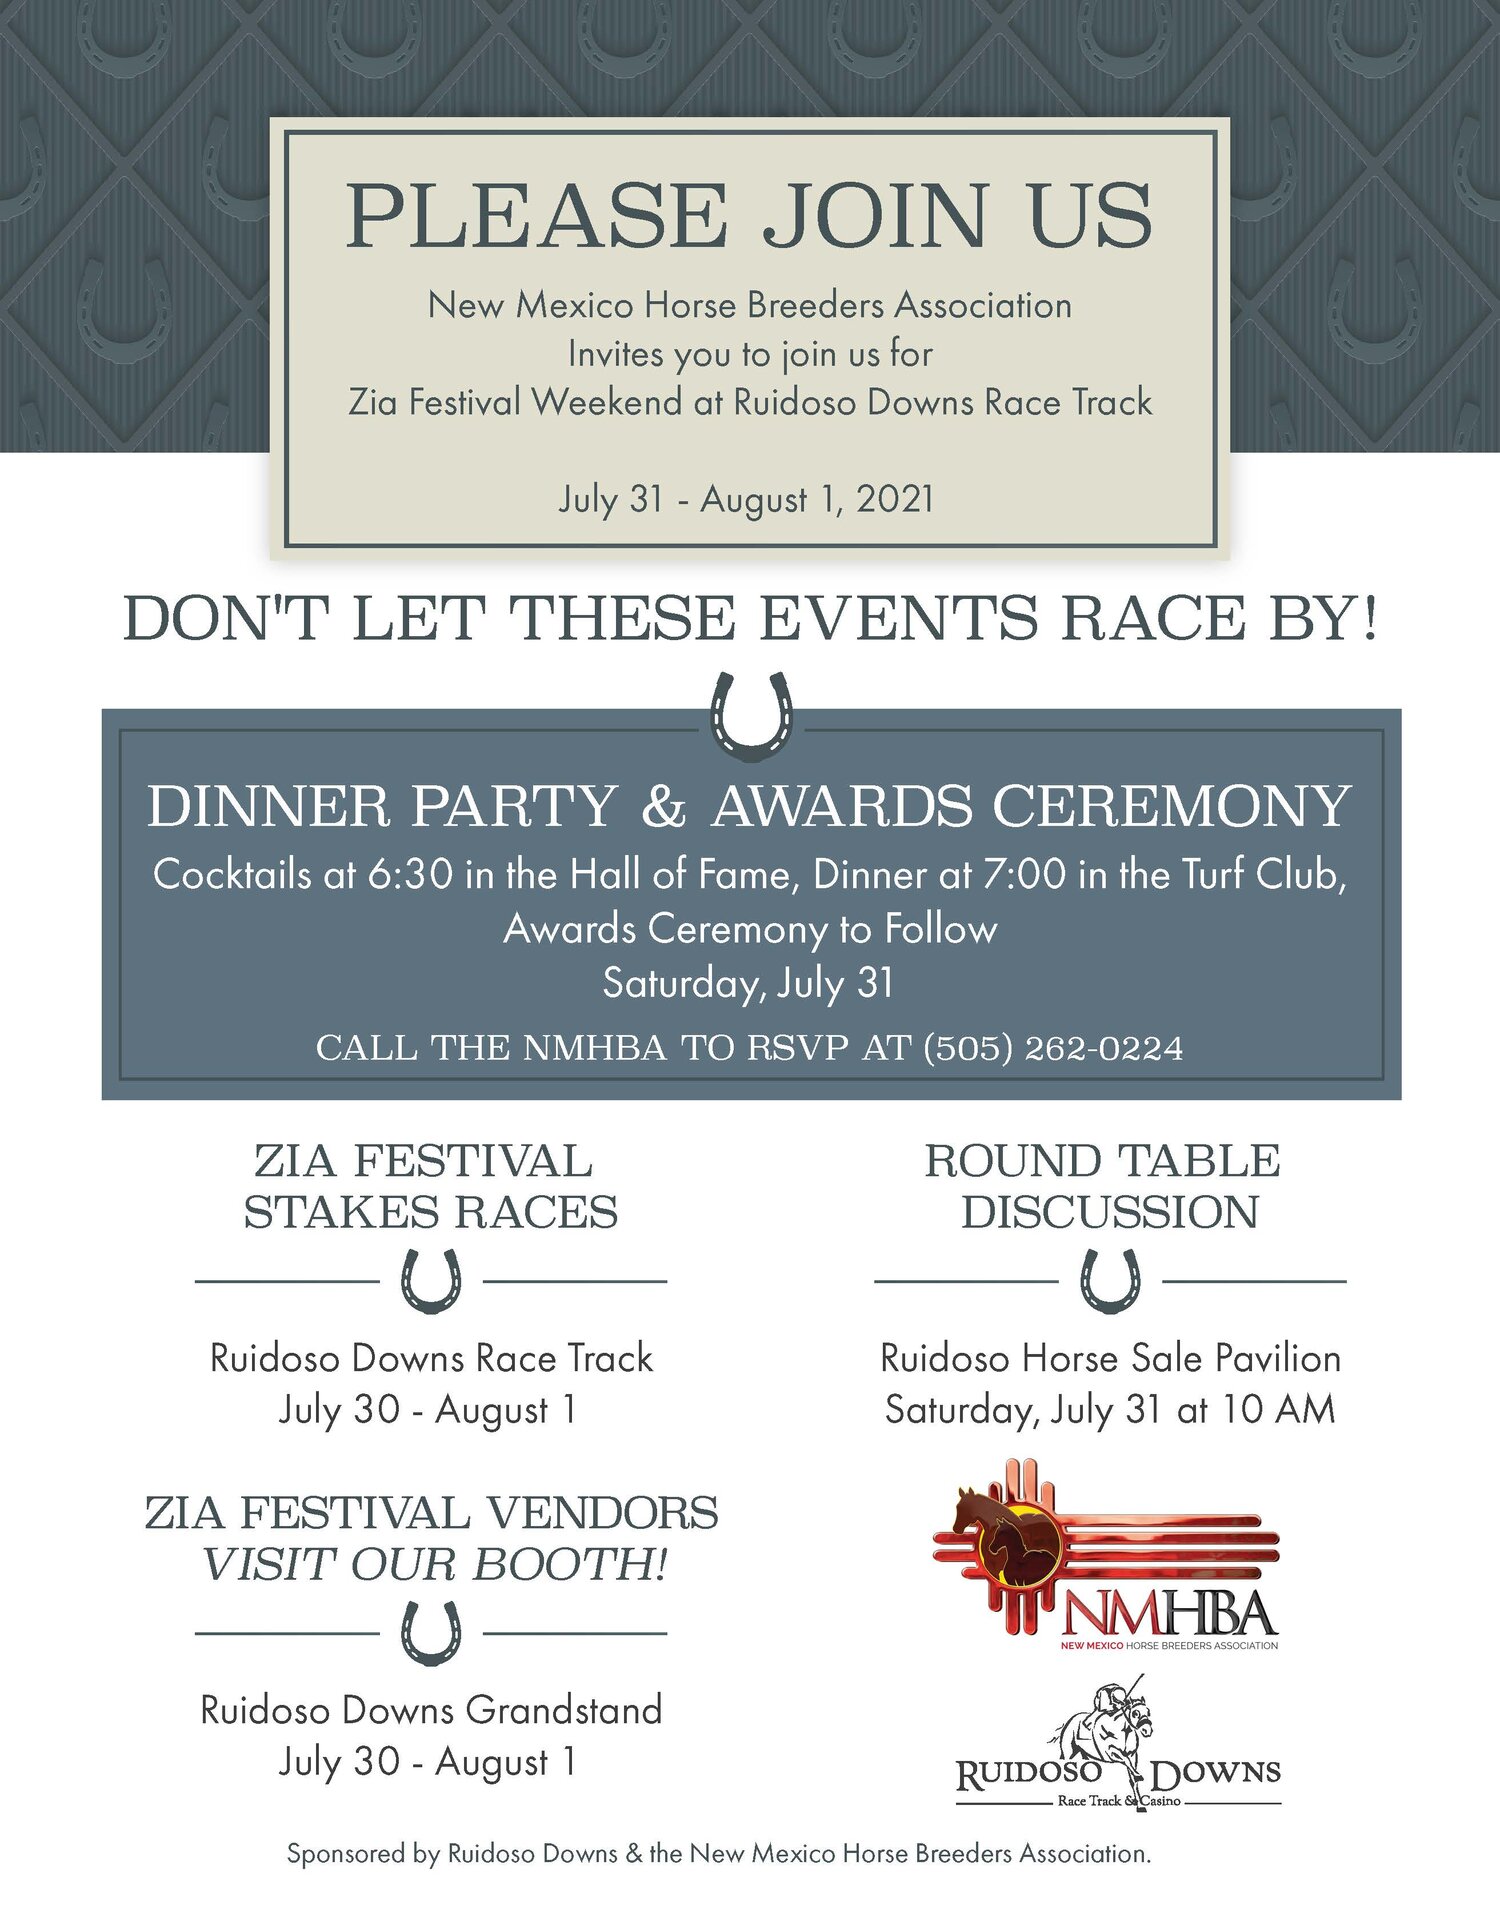 New Mexico Horse Breeders Association to Host Dinner Party & Awards ...